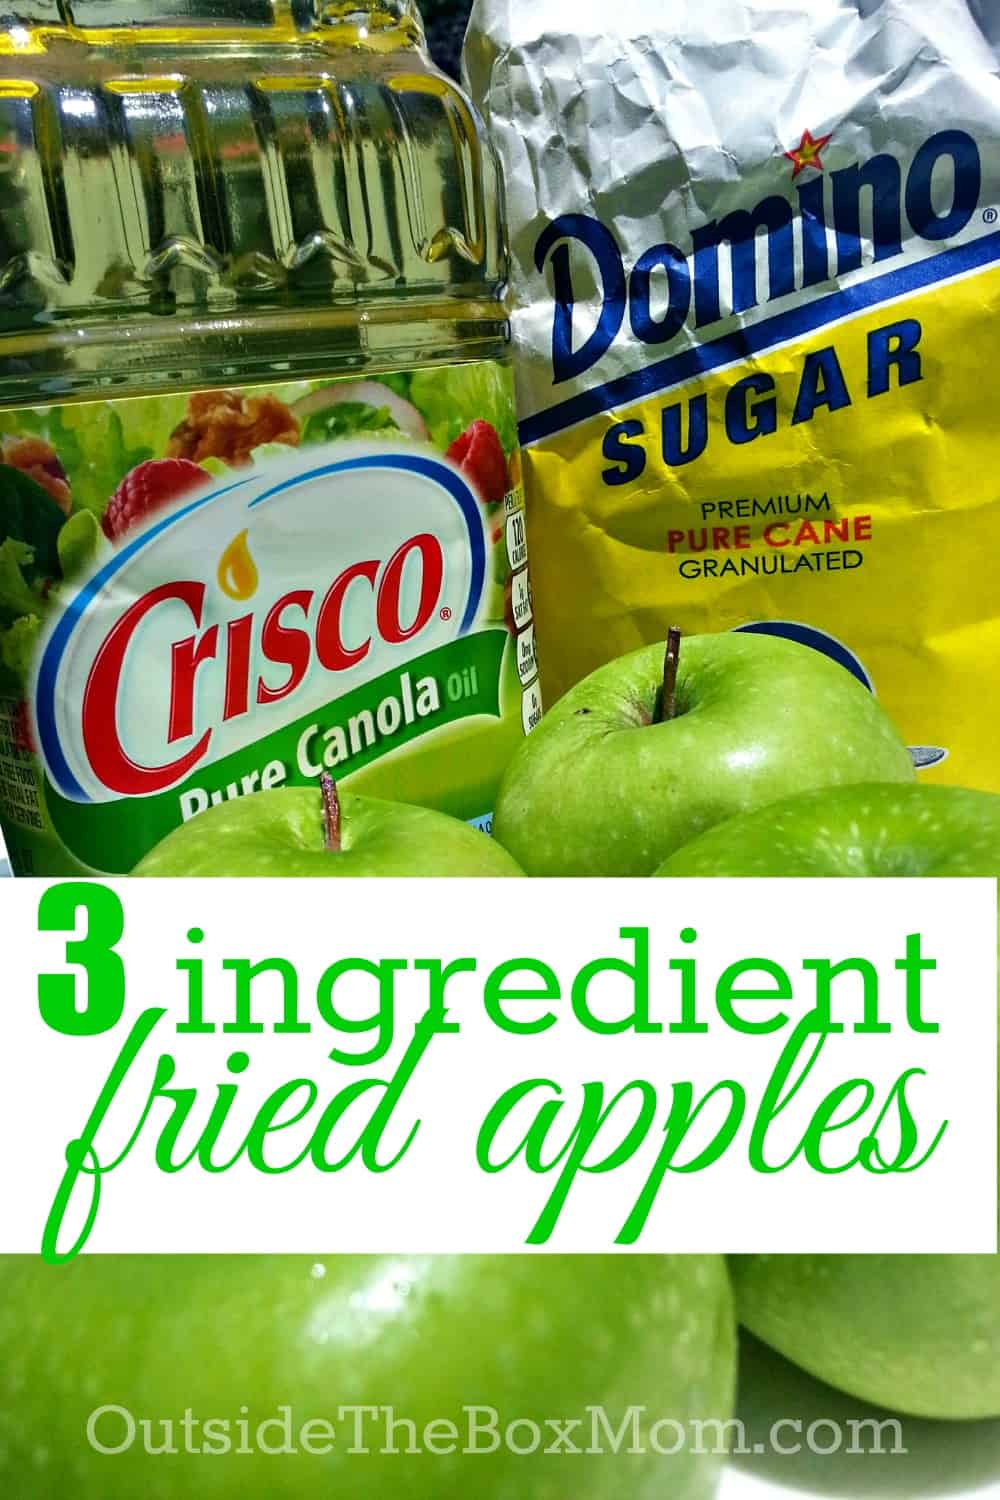 Fried apples are a thrifty recipe to make using one of the least expensive fruits available. If you are looking for a Fried Apples Recipe, but not just any. More like the Best Southern Fried Apples you’ve ever seen. | OutsideTheBoxMom.com